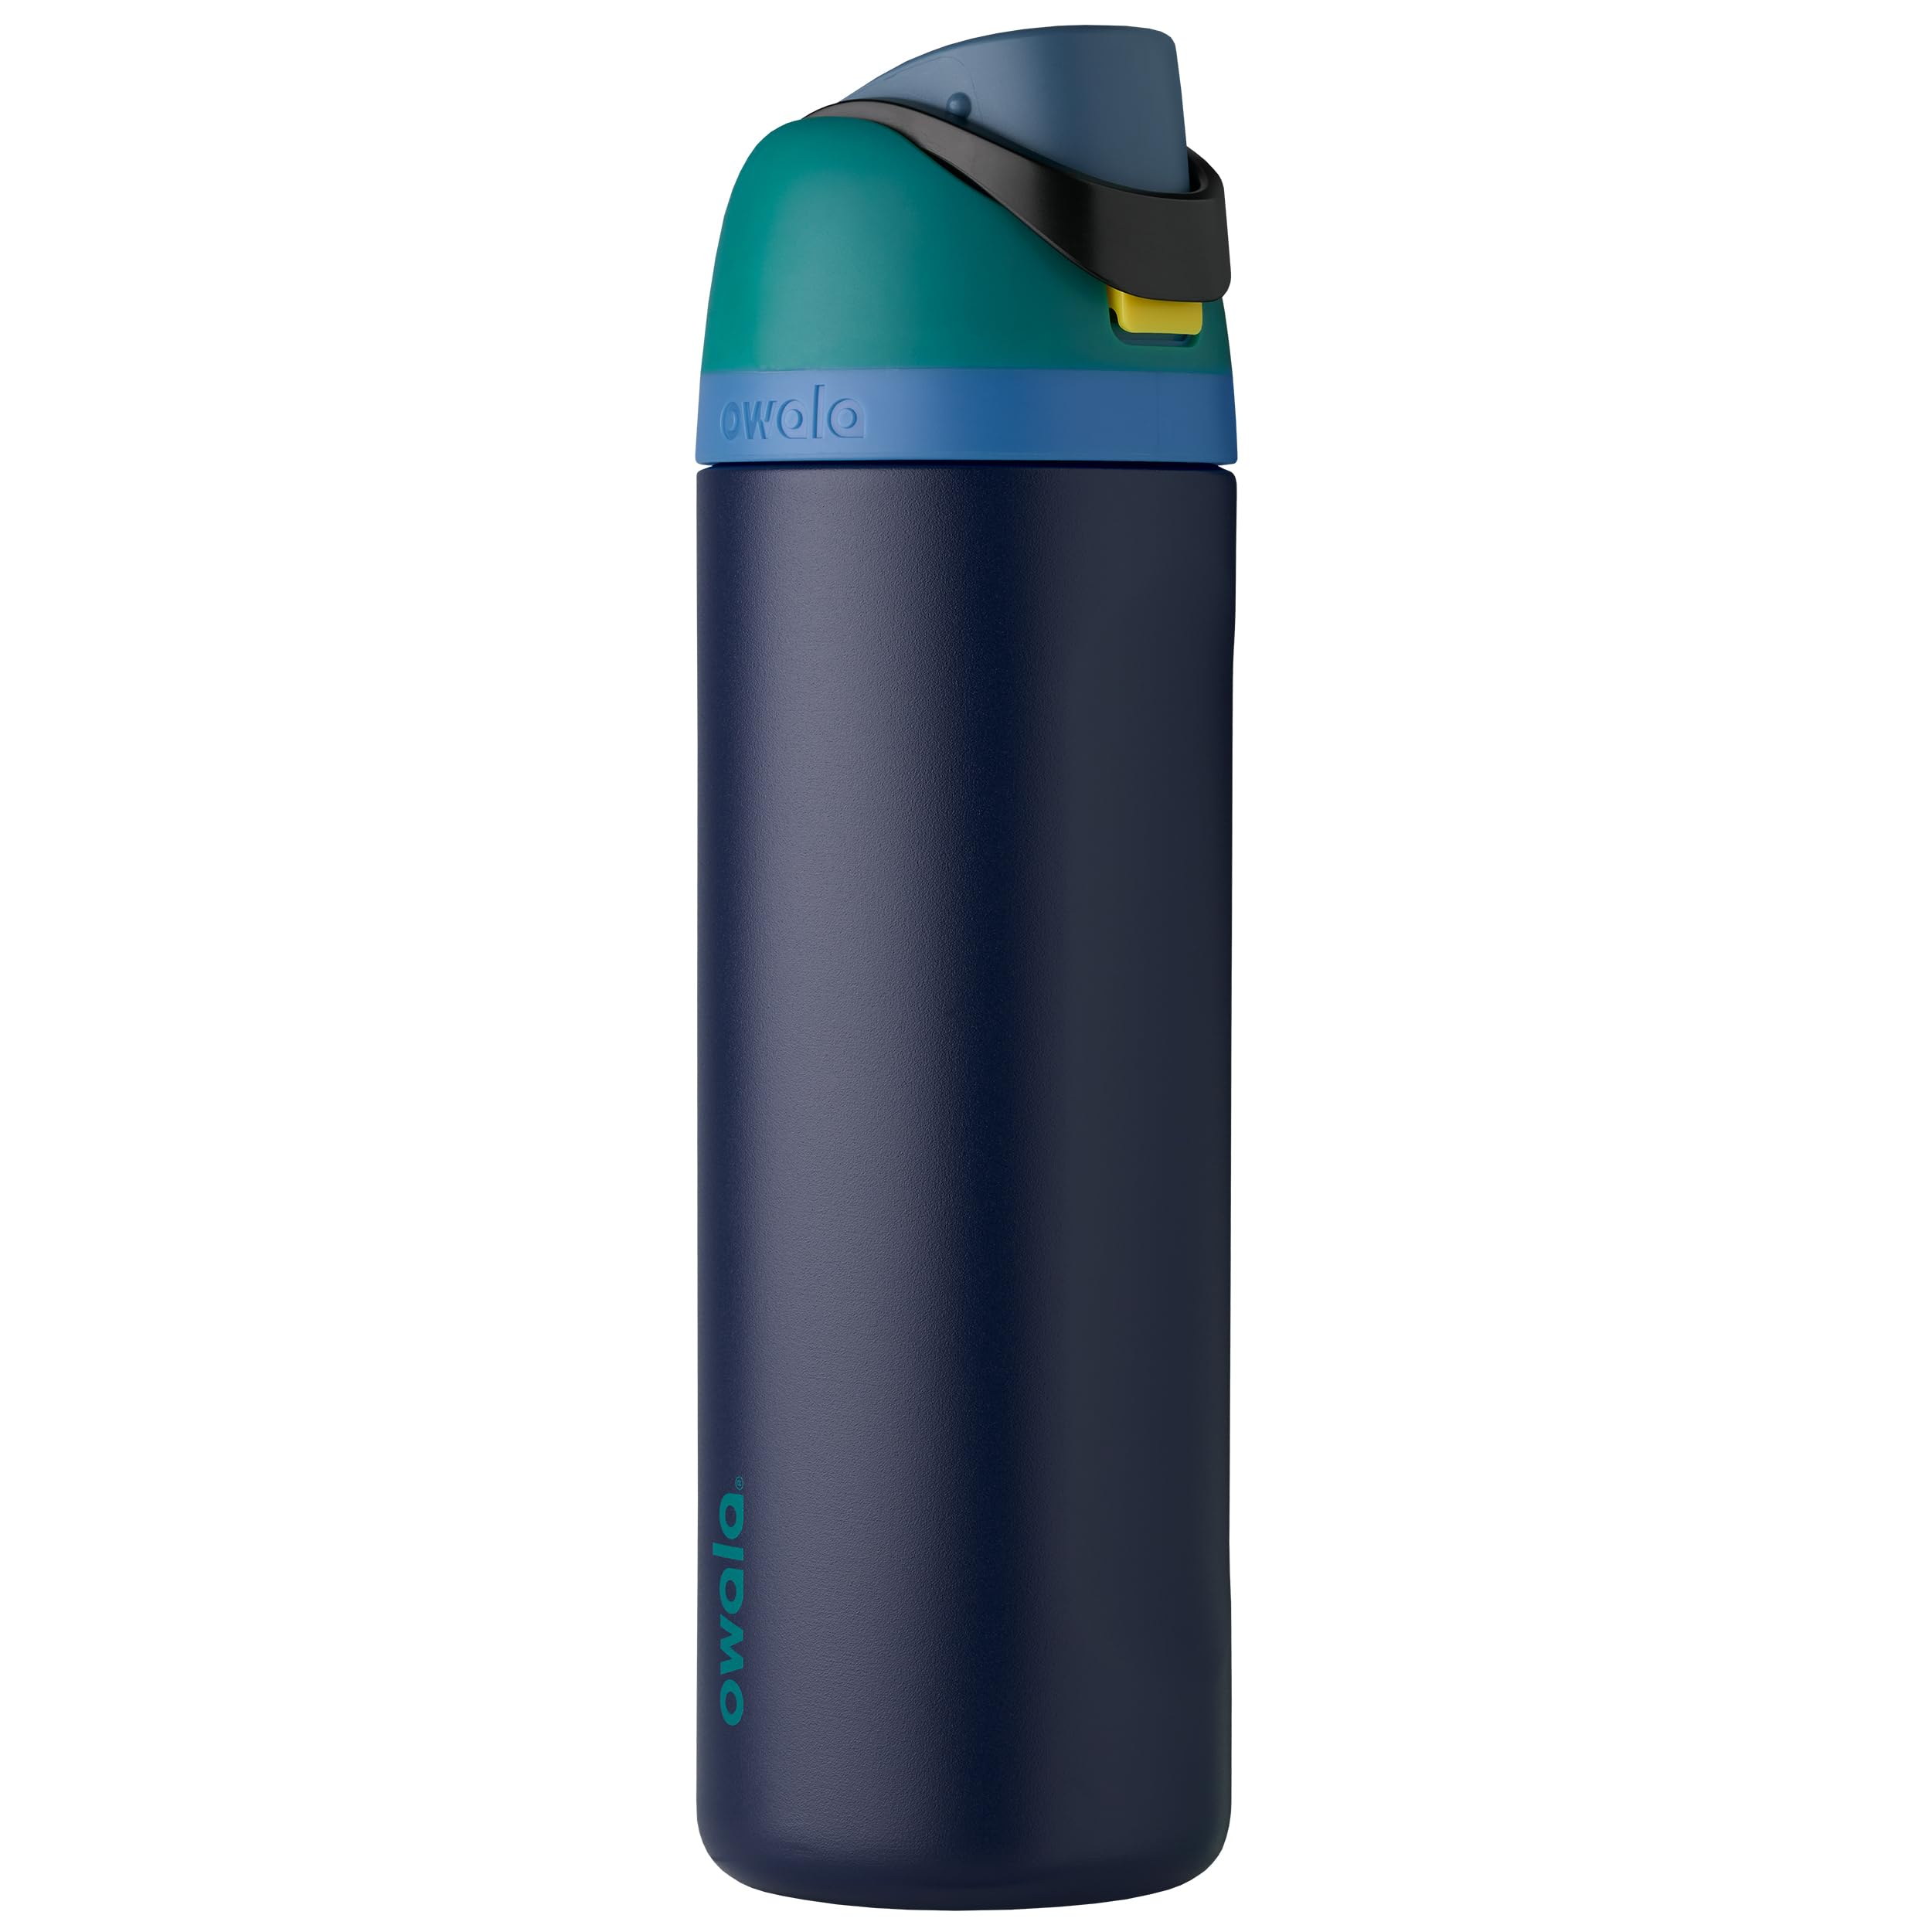 Owala FreeSip Insulated Stainless Steel Water Bottle with Straw for Sports and Travel, BPA-Free, 24-oz, Teal/Navy (Nautical Twilight)